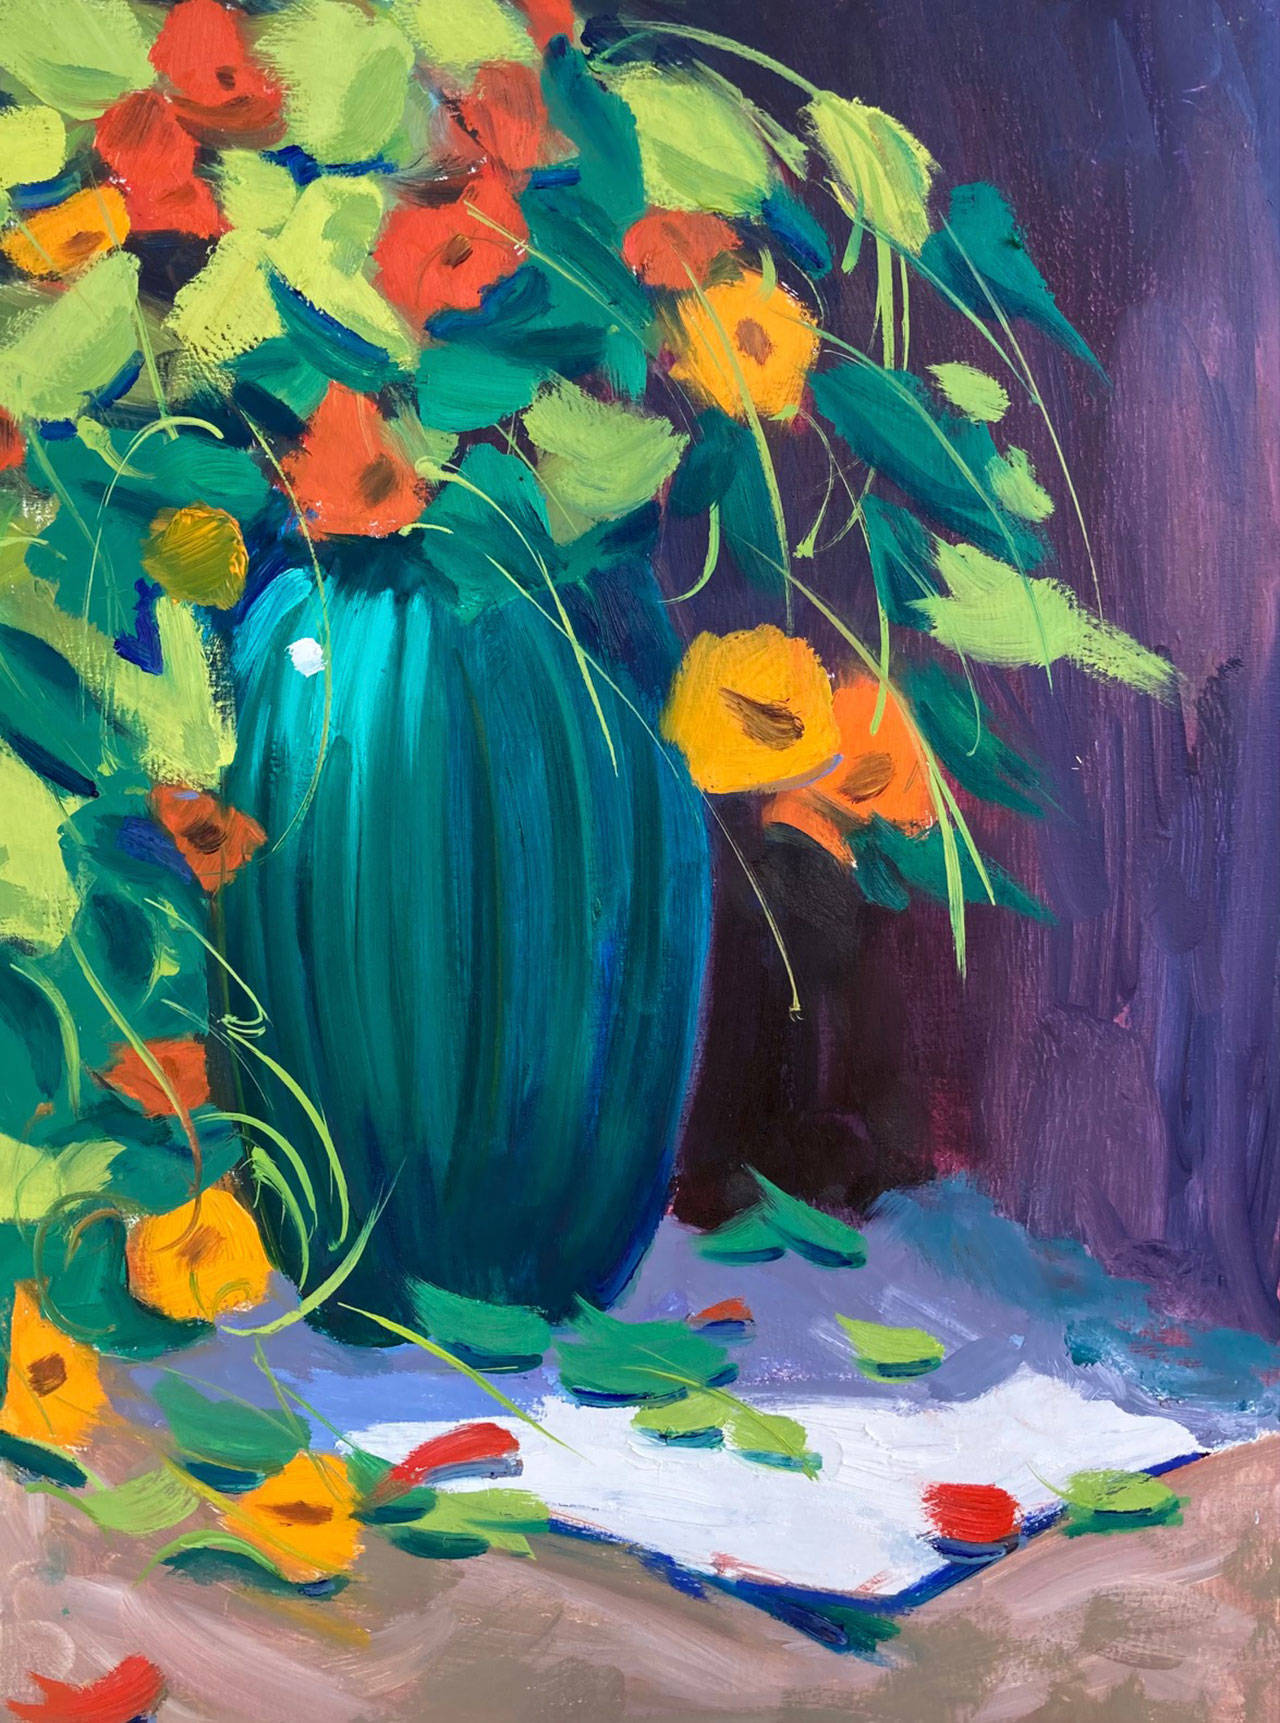 “Flutter of Nasturtiums” (oil on linen) by Jinx Bryant, a Sequim artist whose work will be on display Sept. 4-5 at the annual ARTfusion event. Submitted art